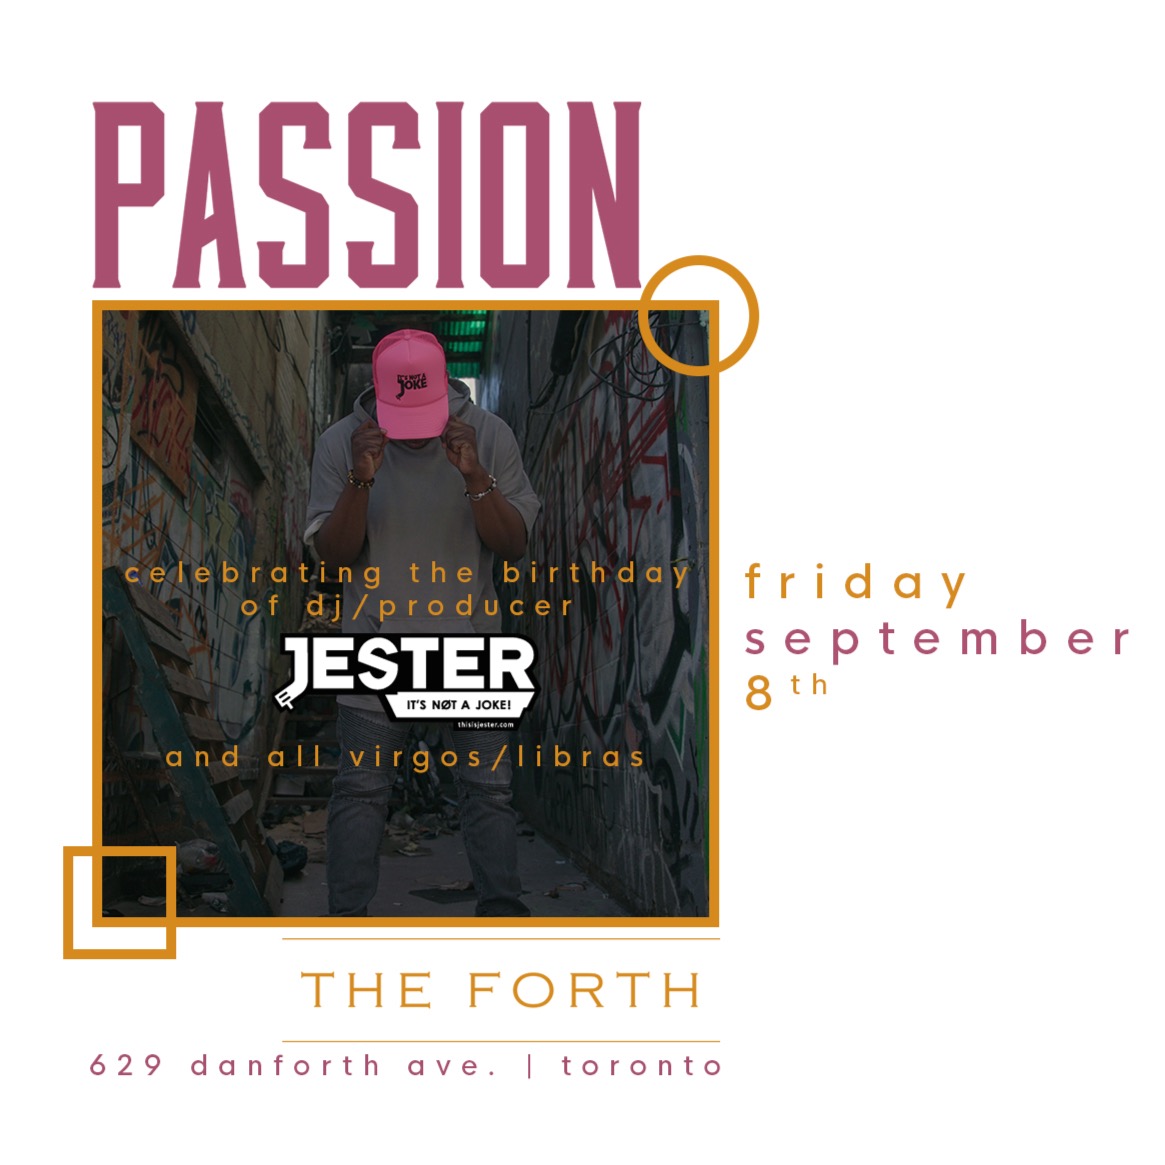 Passion - The Birthday Celebration for Jester and all